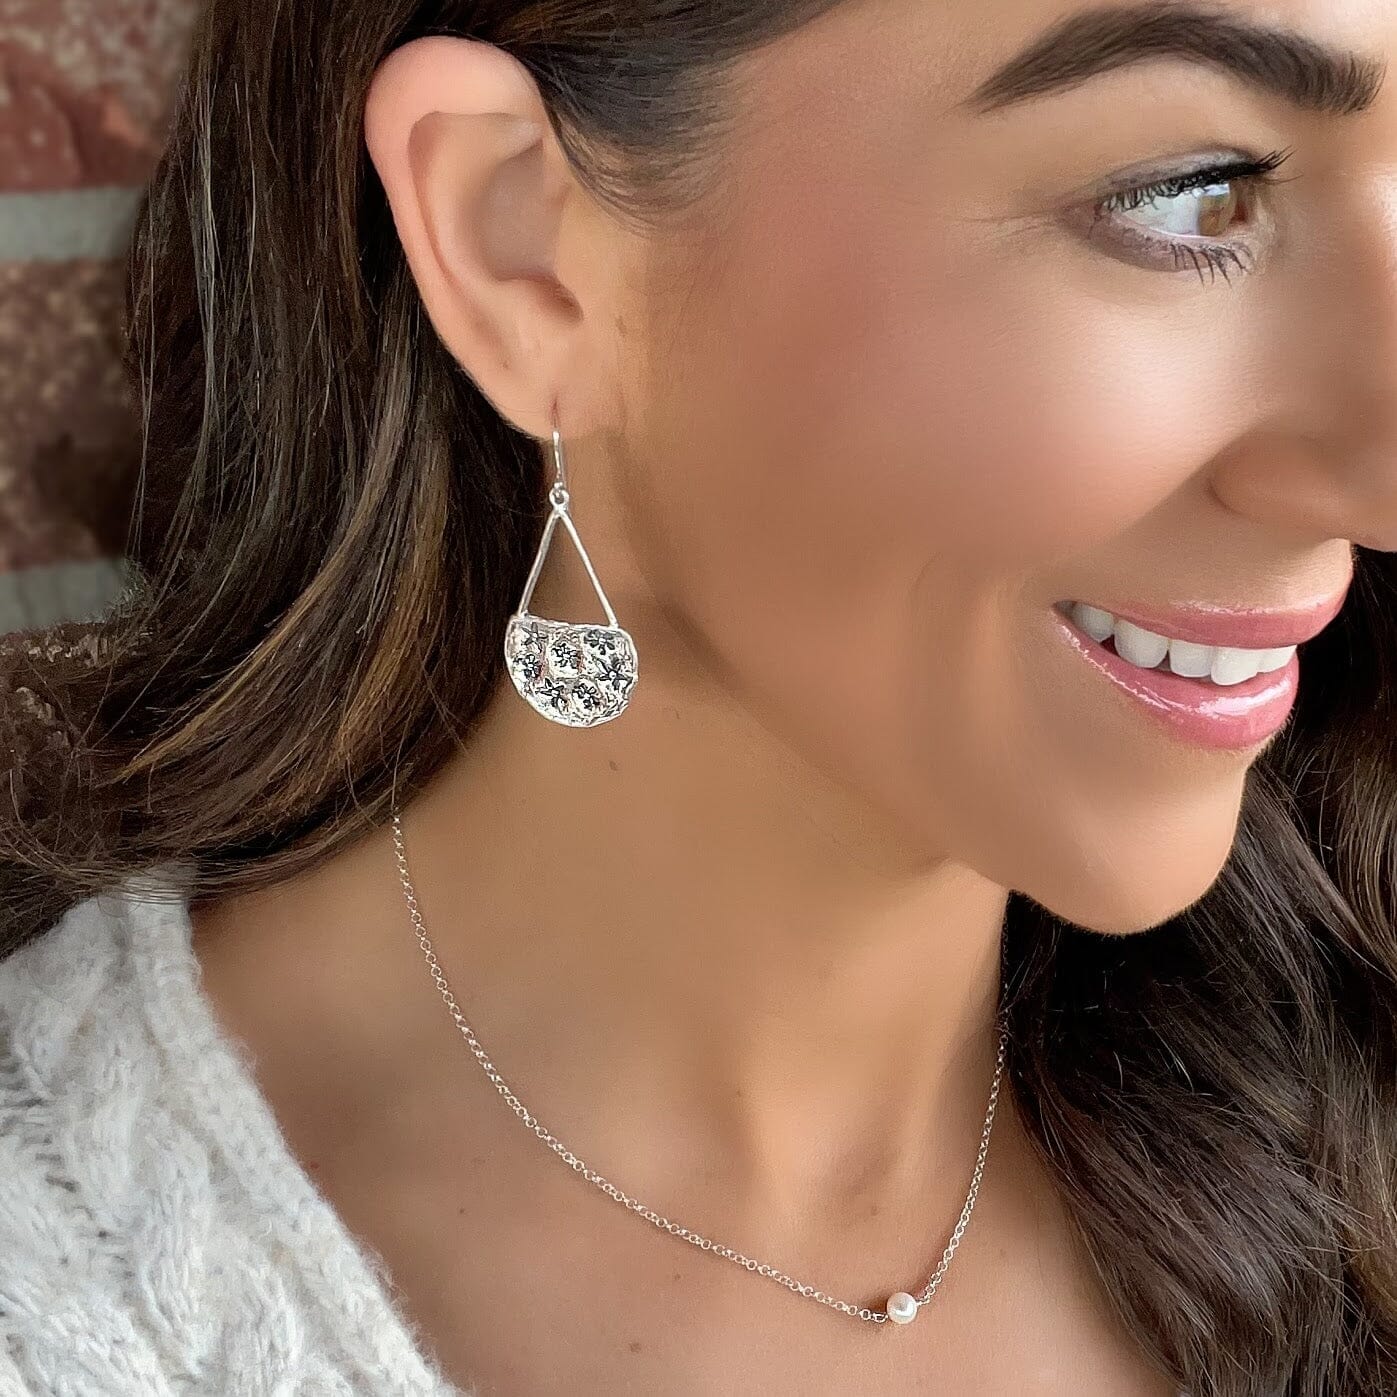 Gondola Earrings paired with Everyday Grace Necklace